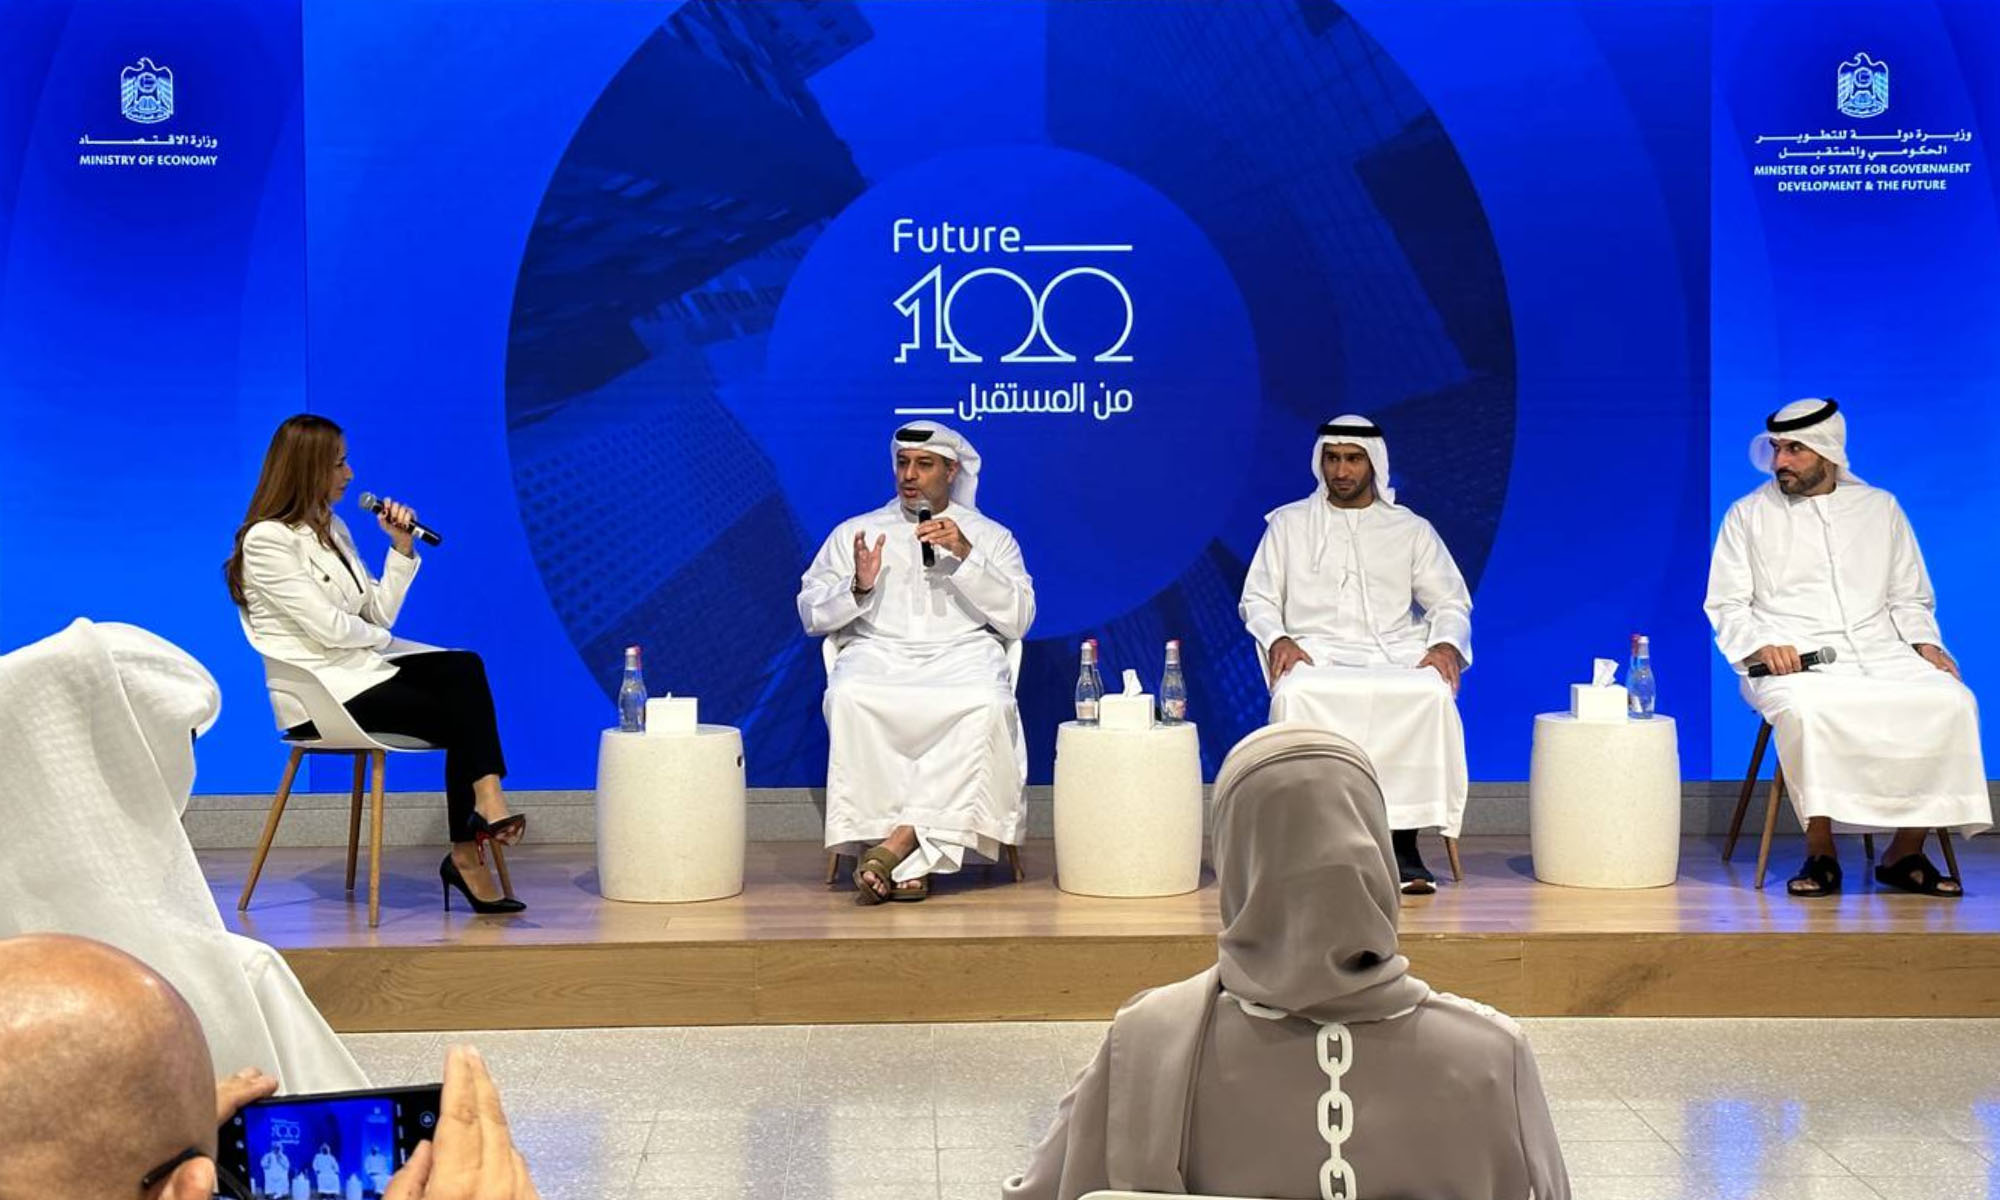 the uae has launched a program to assist 100 startups